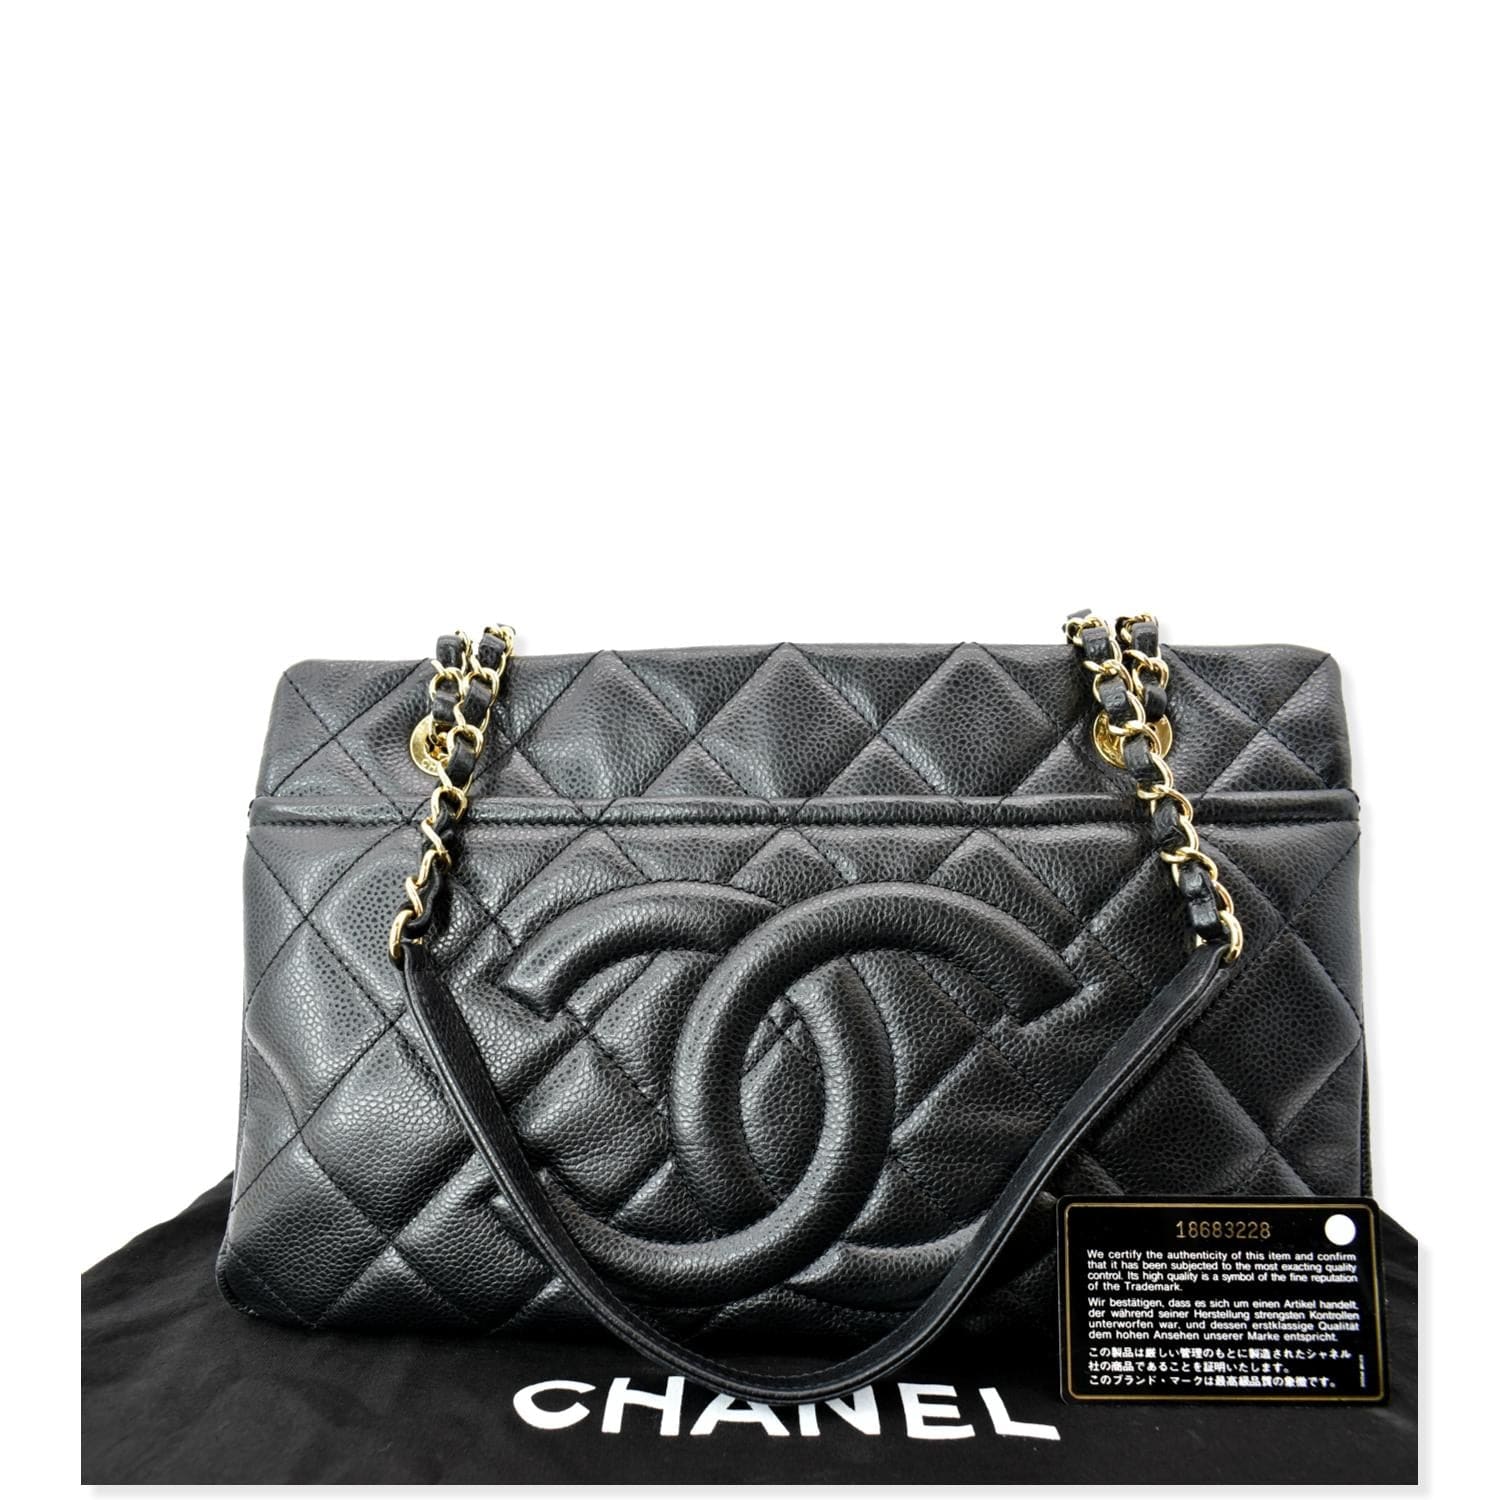 Shopper MY OTHER BAGS ARE CHANEL (id: 1070) - TIMEFORF